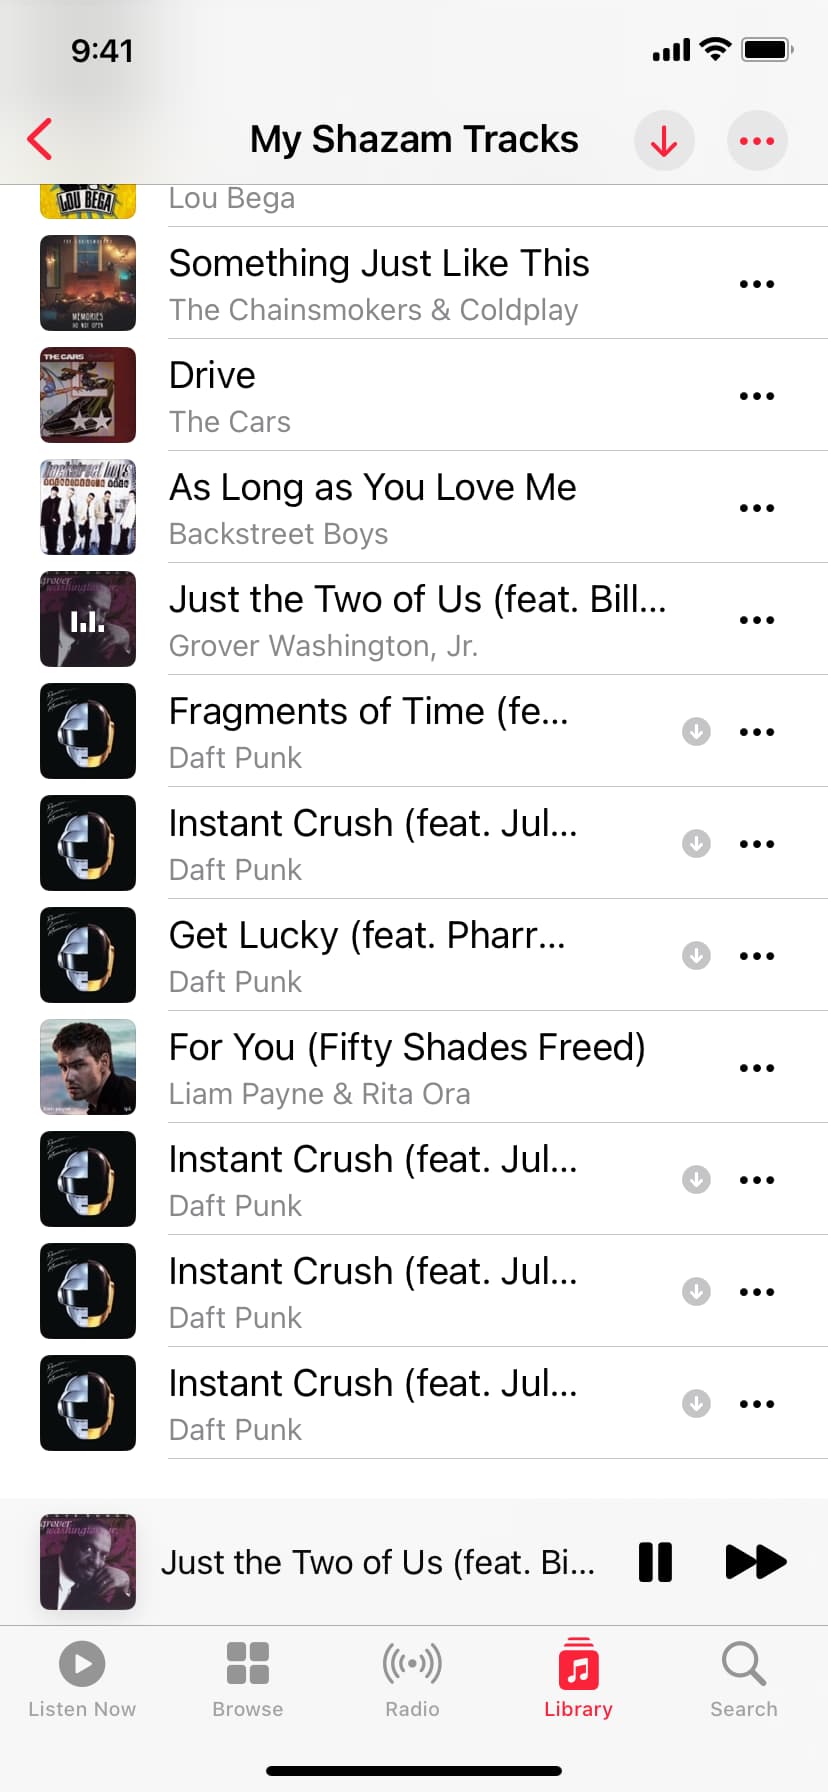 Same song added multiple times to My Shazam Tracks playlist